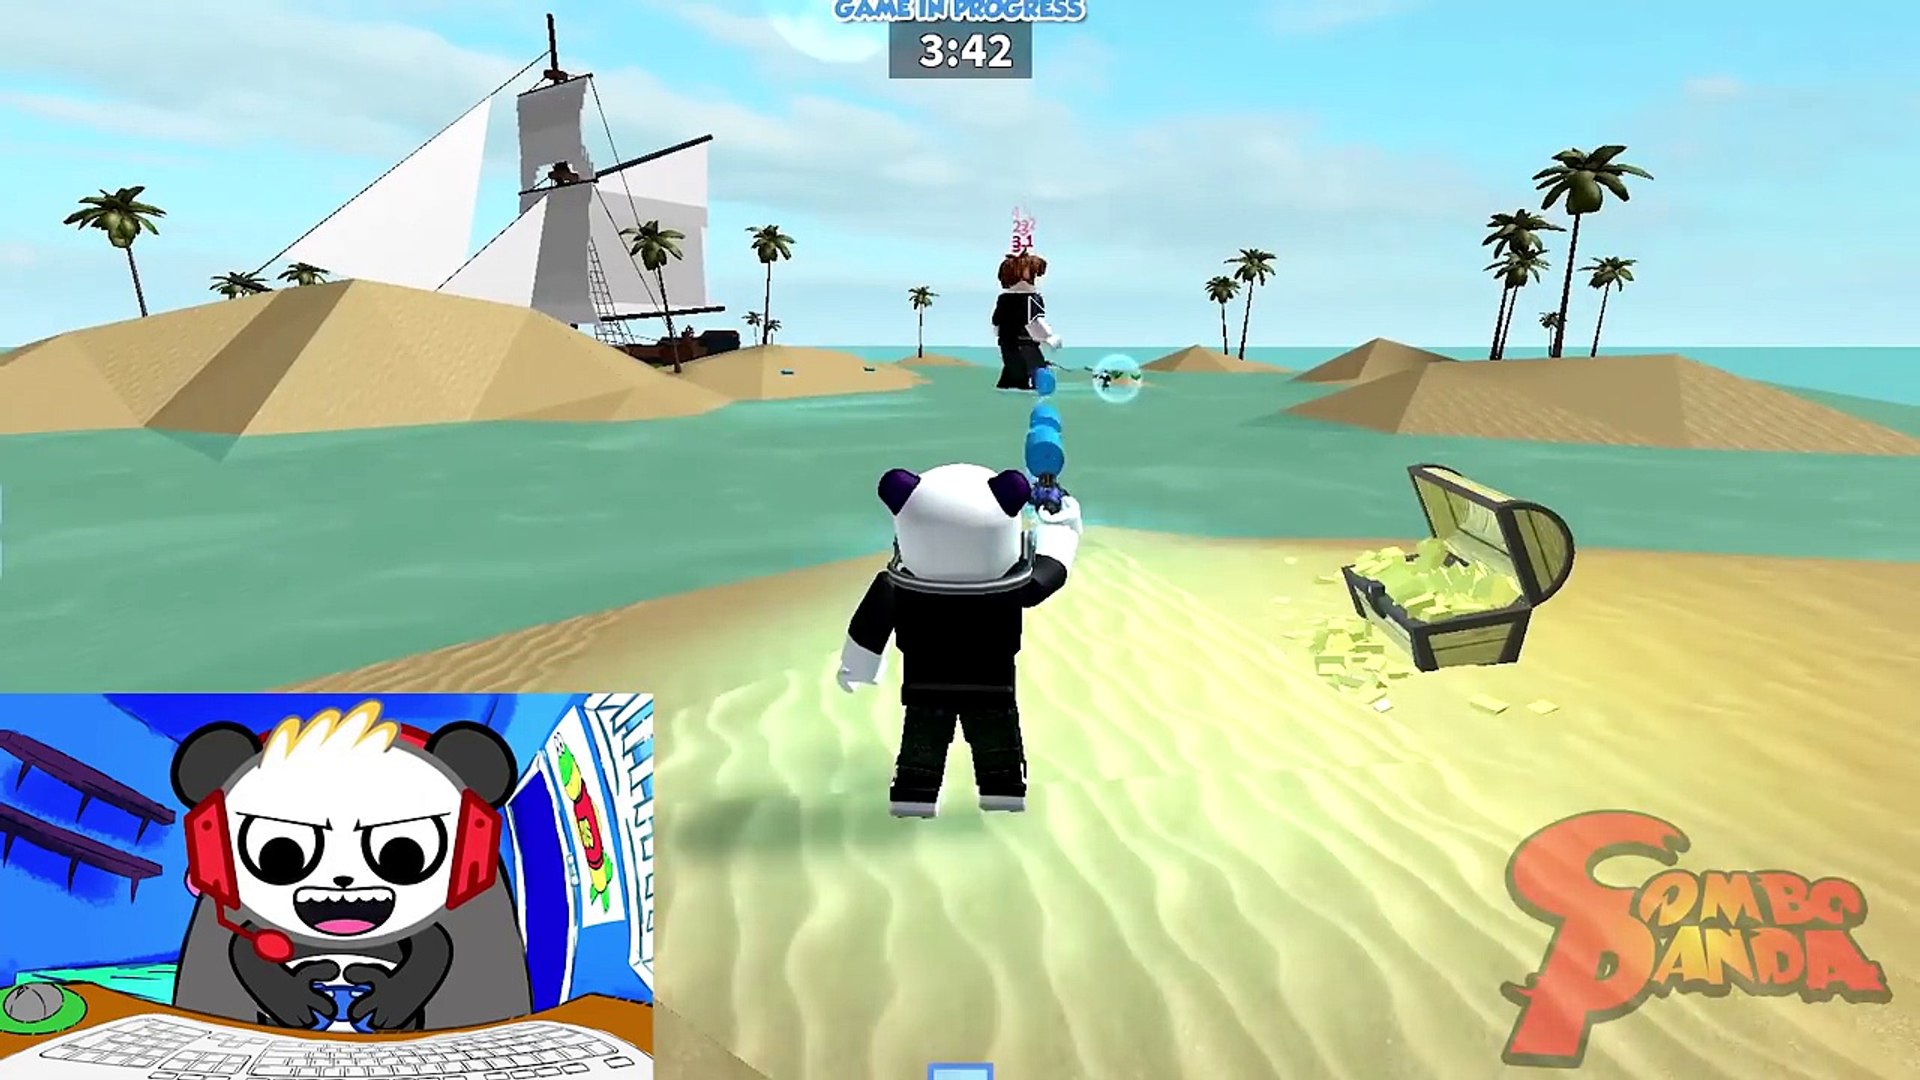 Roblox Battle As A Giant Boss Let S Play With Combo Panda - 42 challenging obby roblox